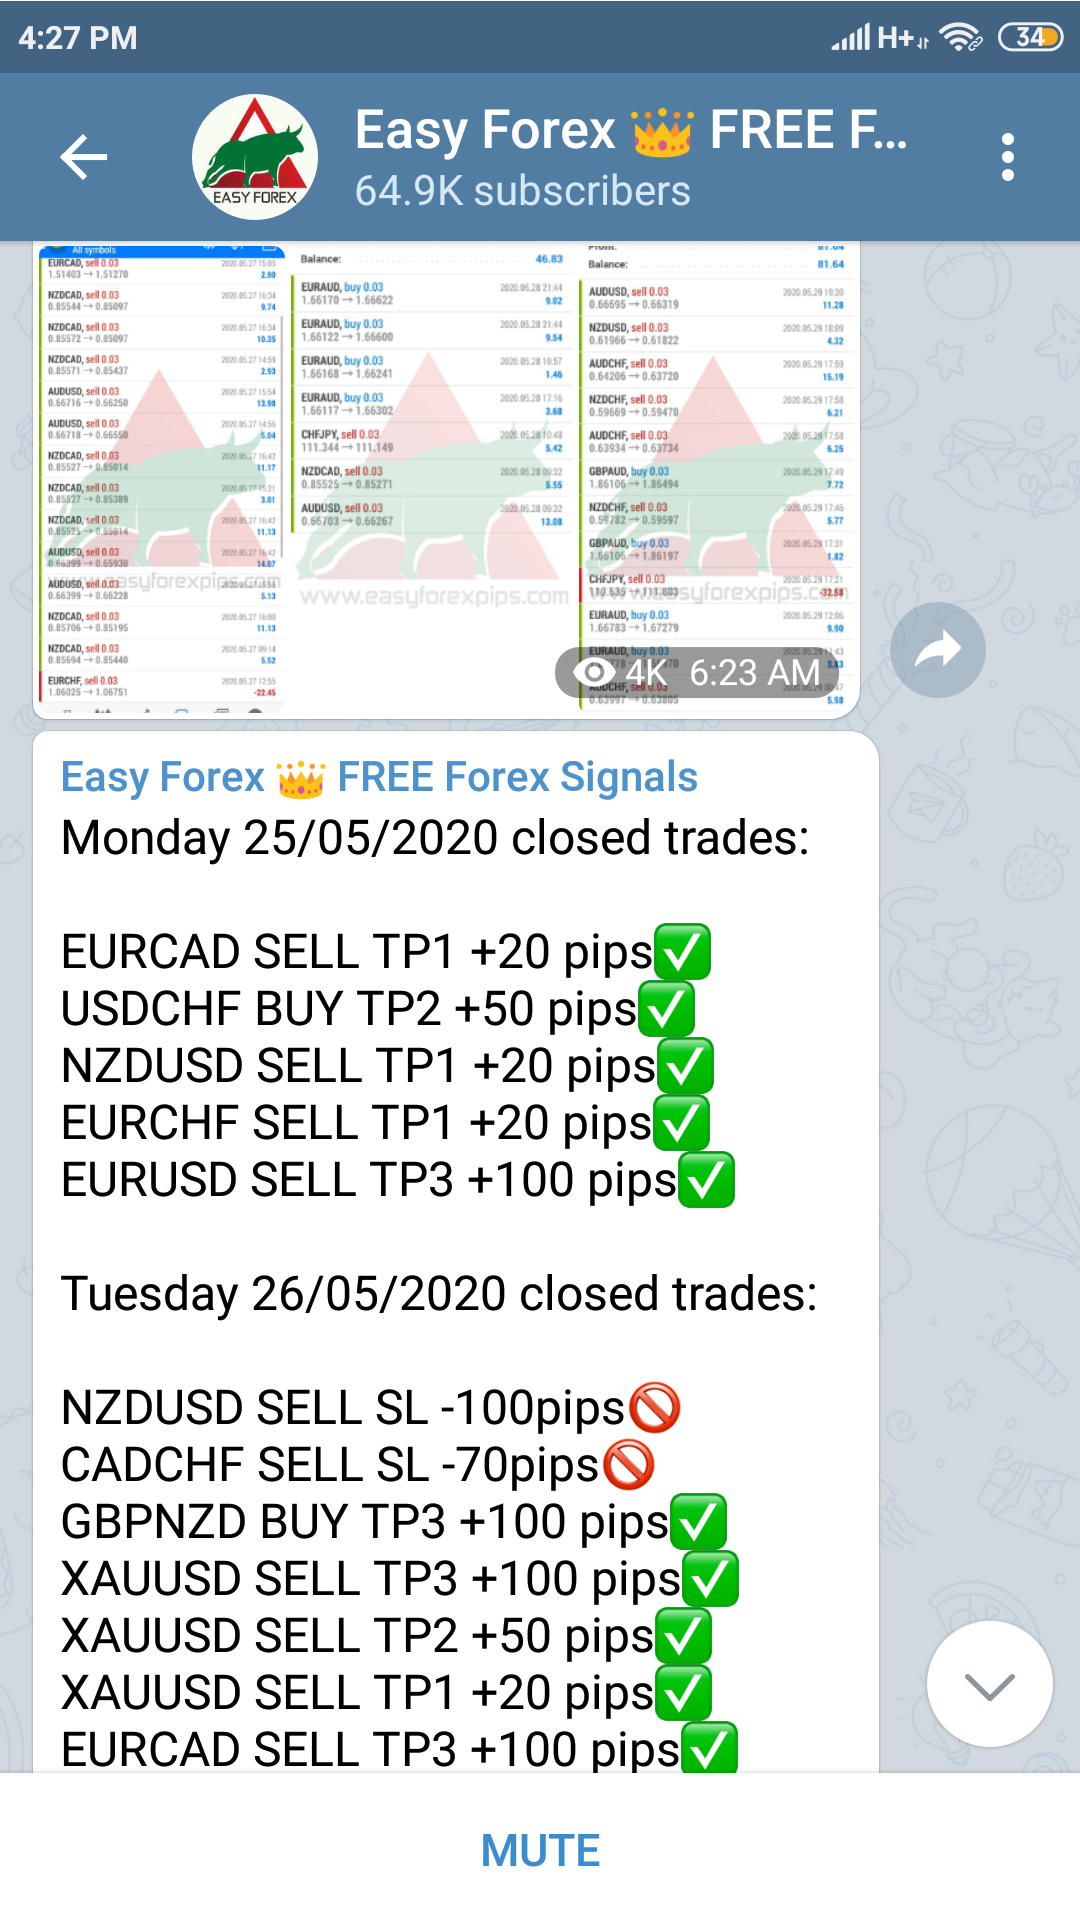 EASY FOREX PIPS FREE CHANNEL SIGNALS RESULTS